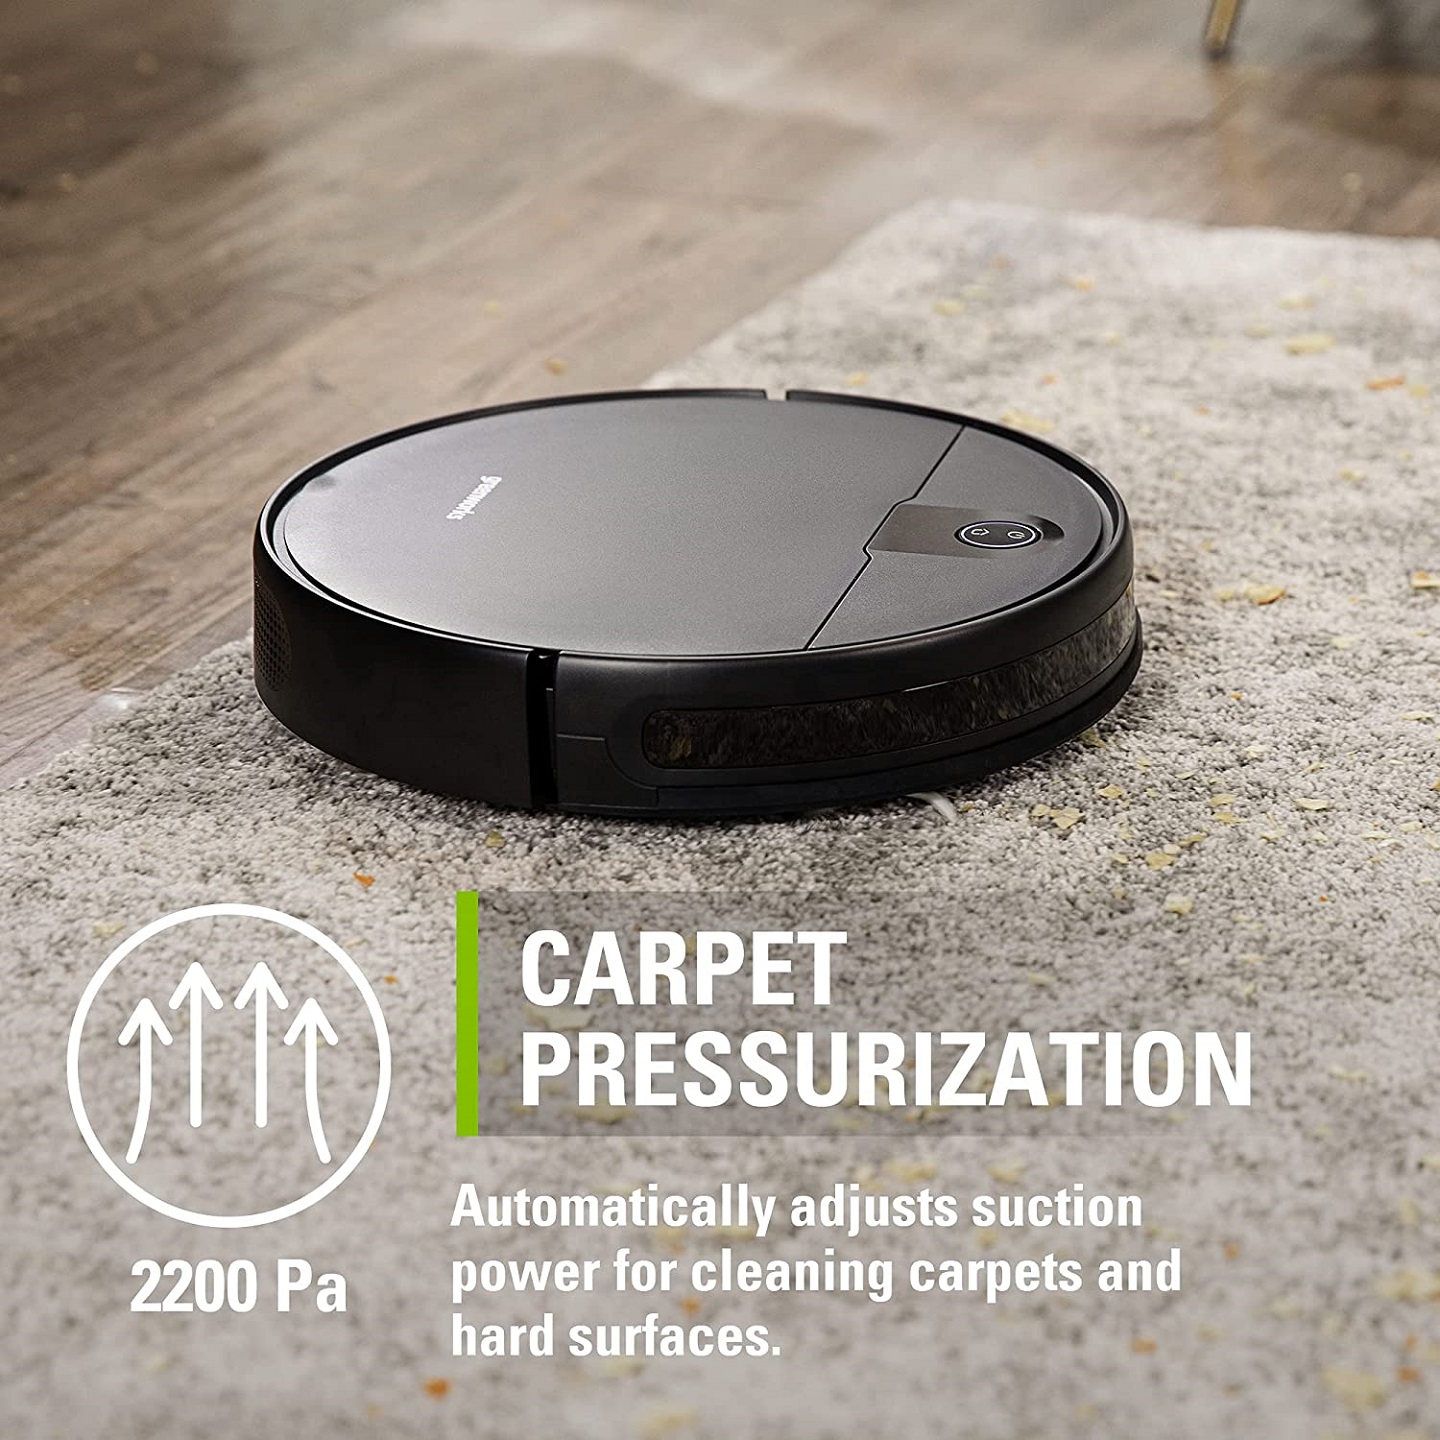 Get The Best App-Controlled Robot Vaccum Cleaner With Automatic Route Planning